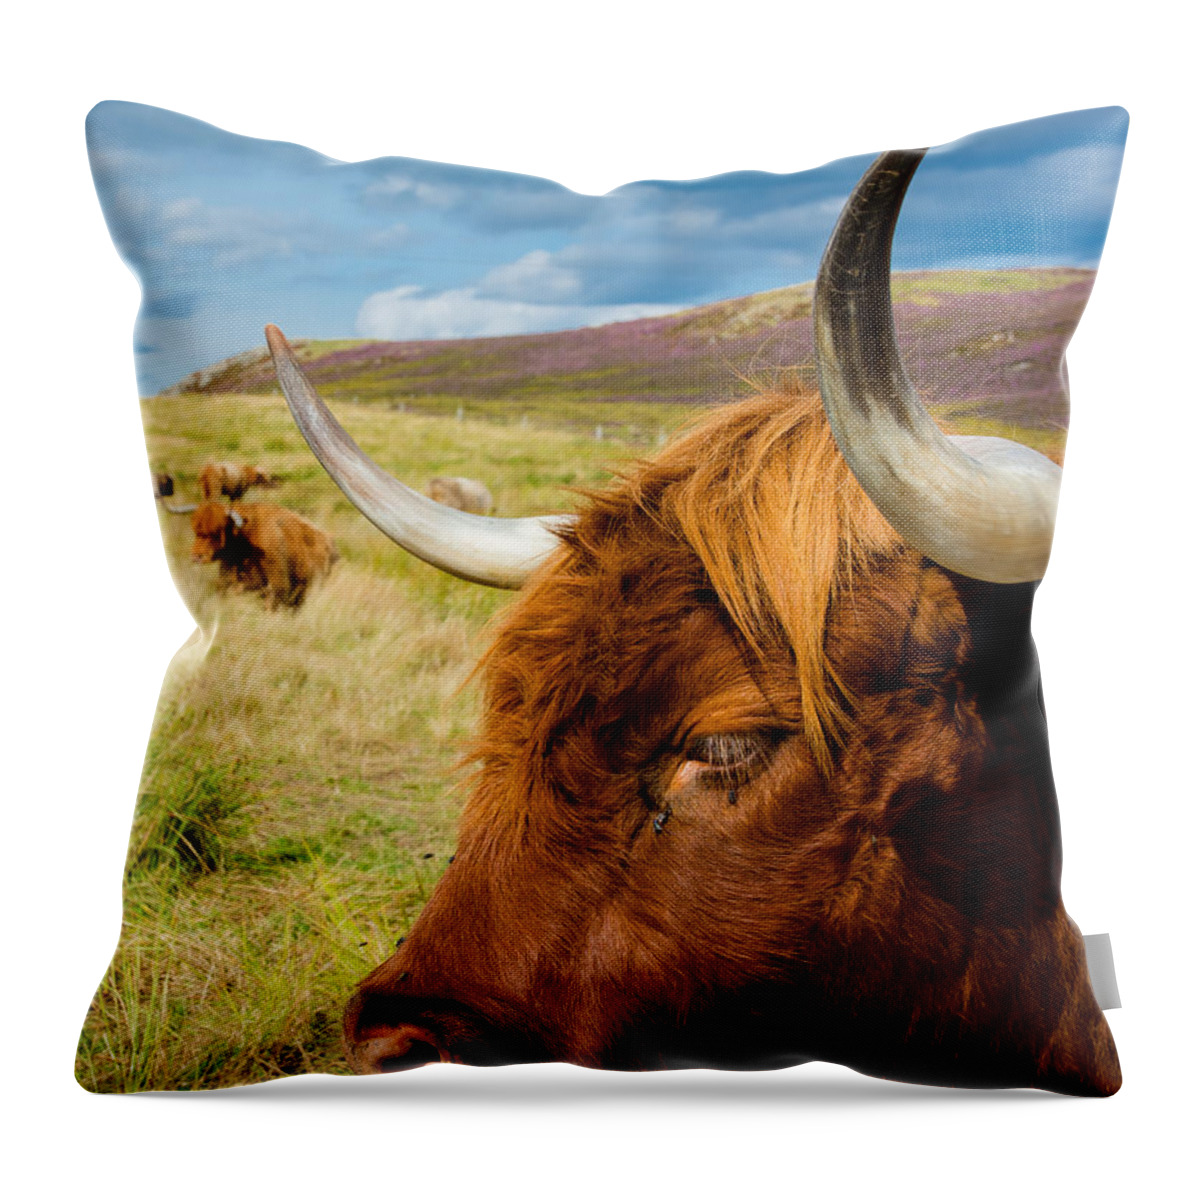 Cow Throw Pillow featuring the photograph Highland Cattle On Scottish Pasture by Andreas Berthold